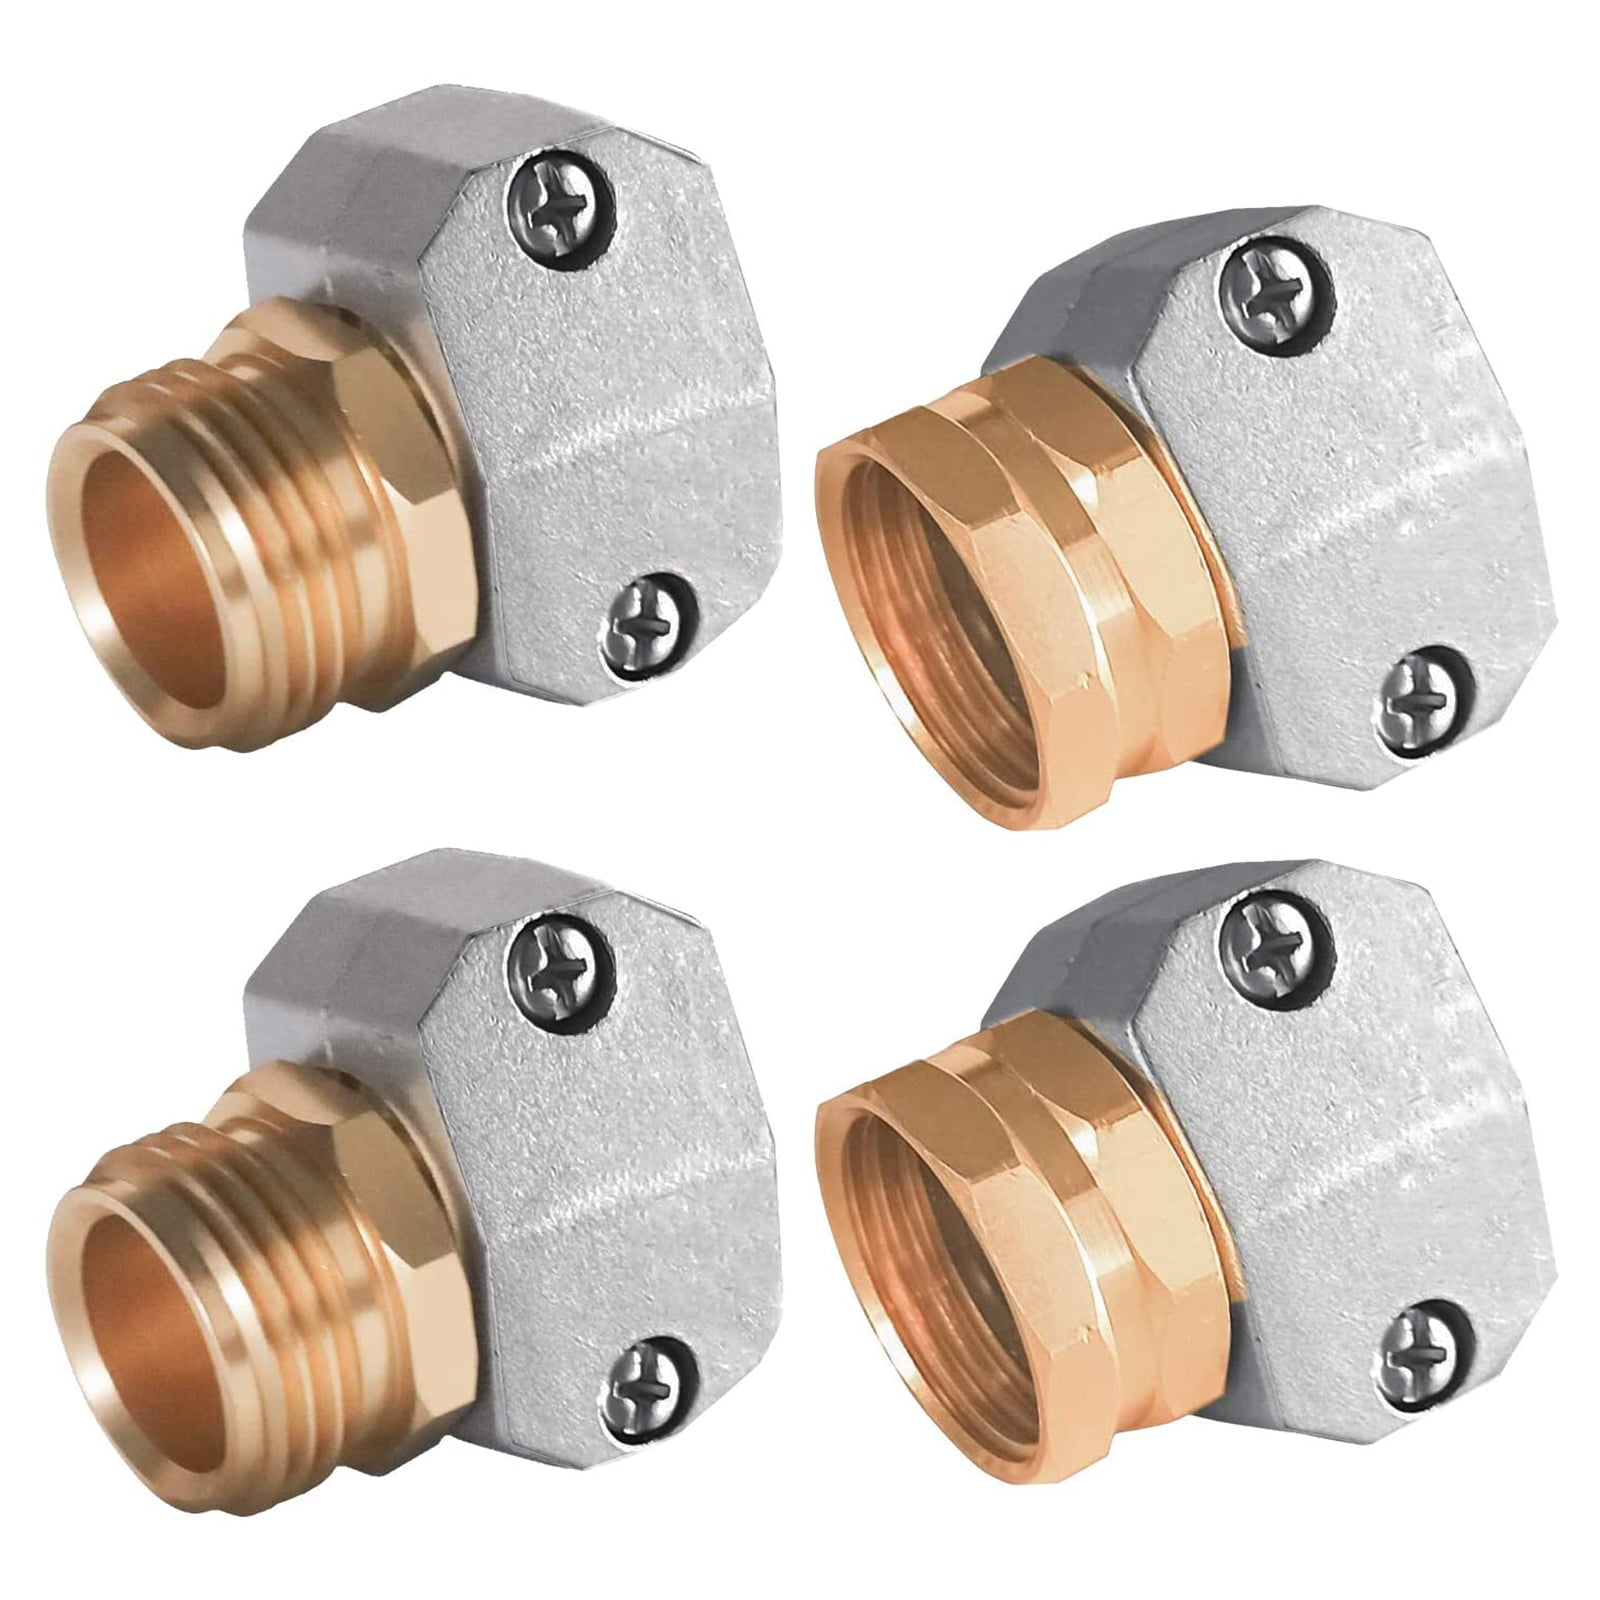 Details about   Garden Hose Repair Connector With Clamps Male & Female Fitting 3 Set FREE SHIP 